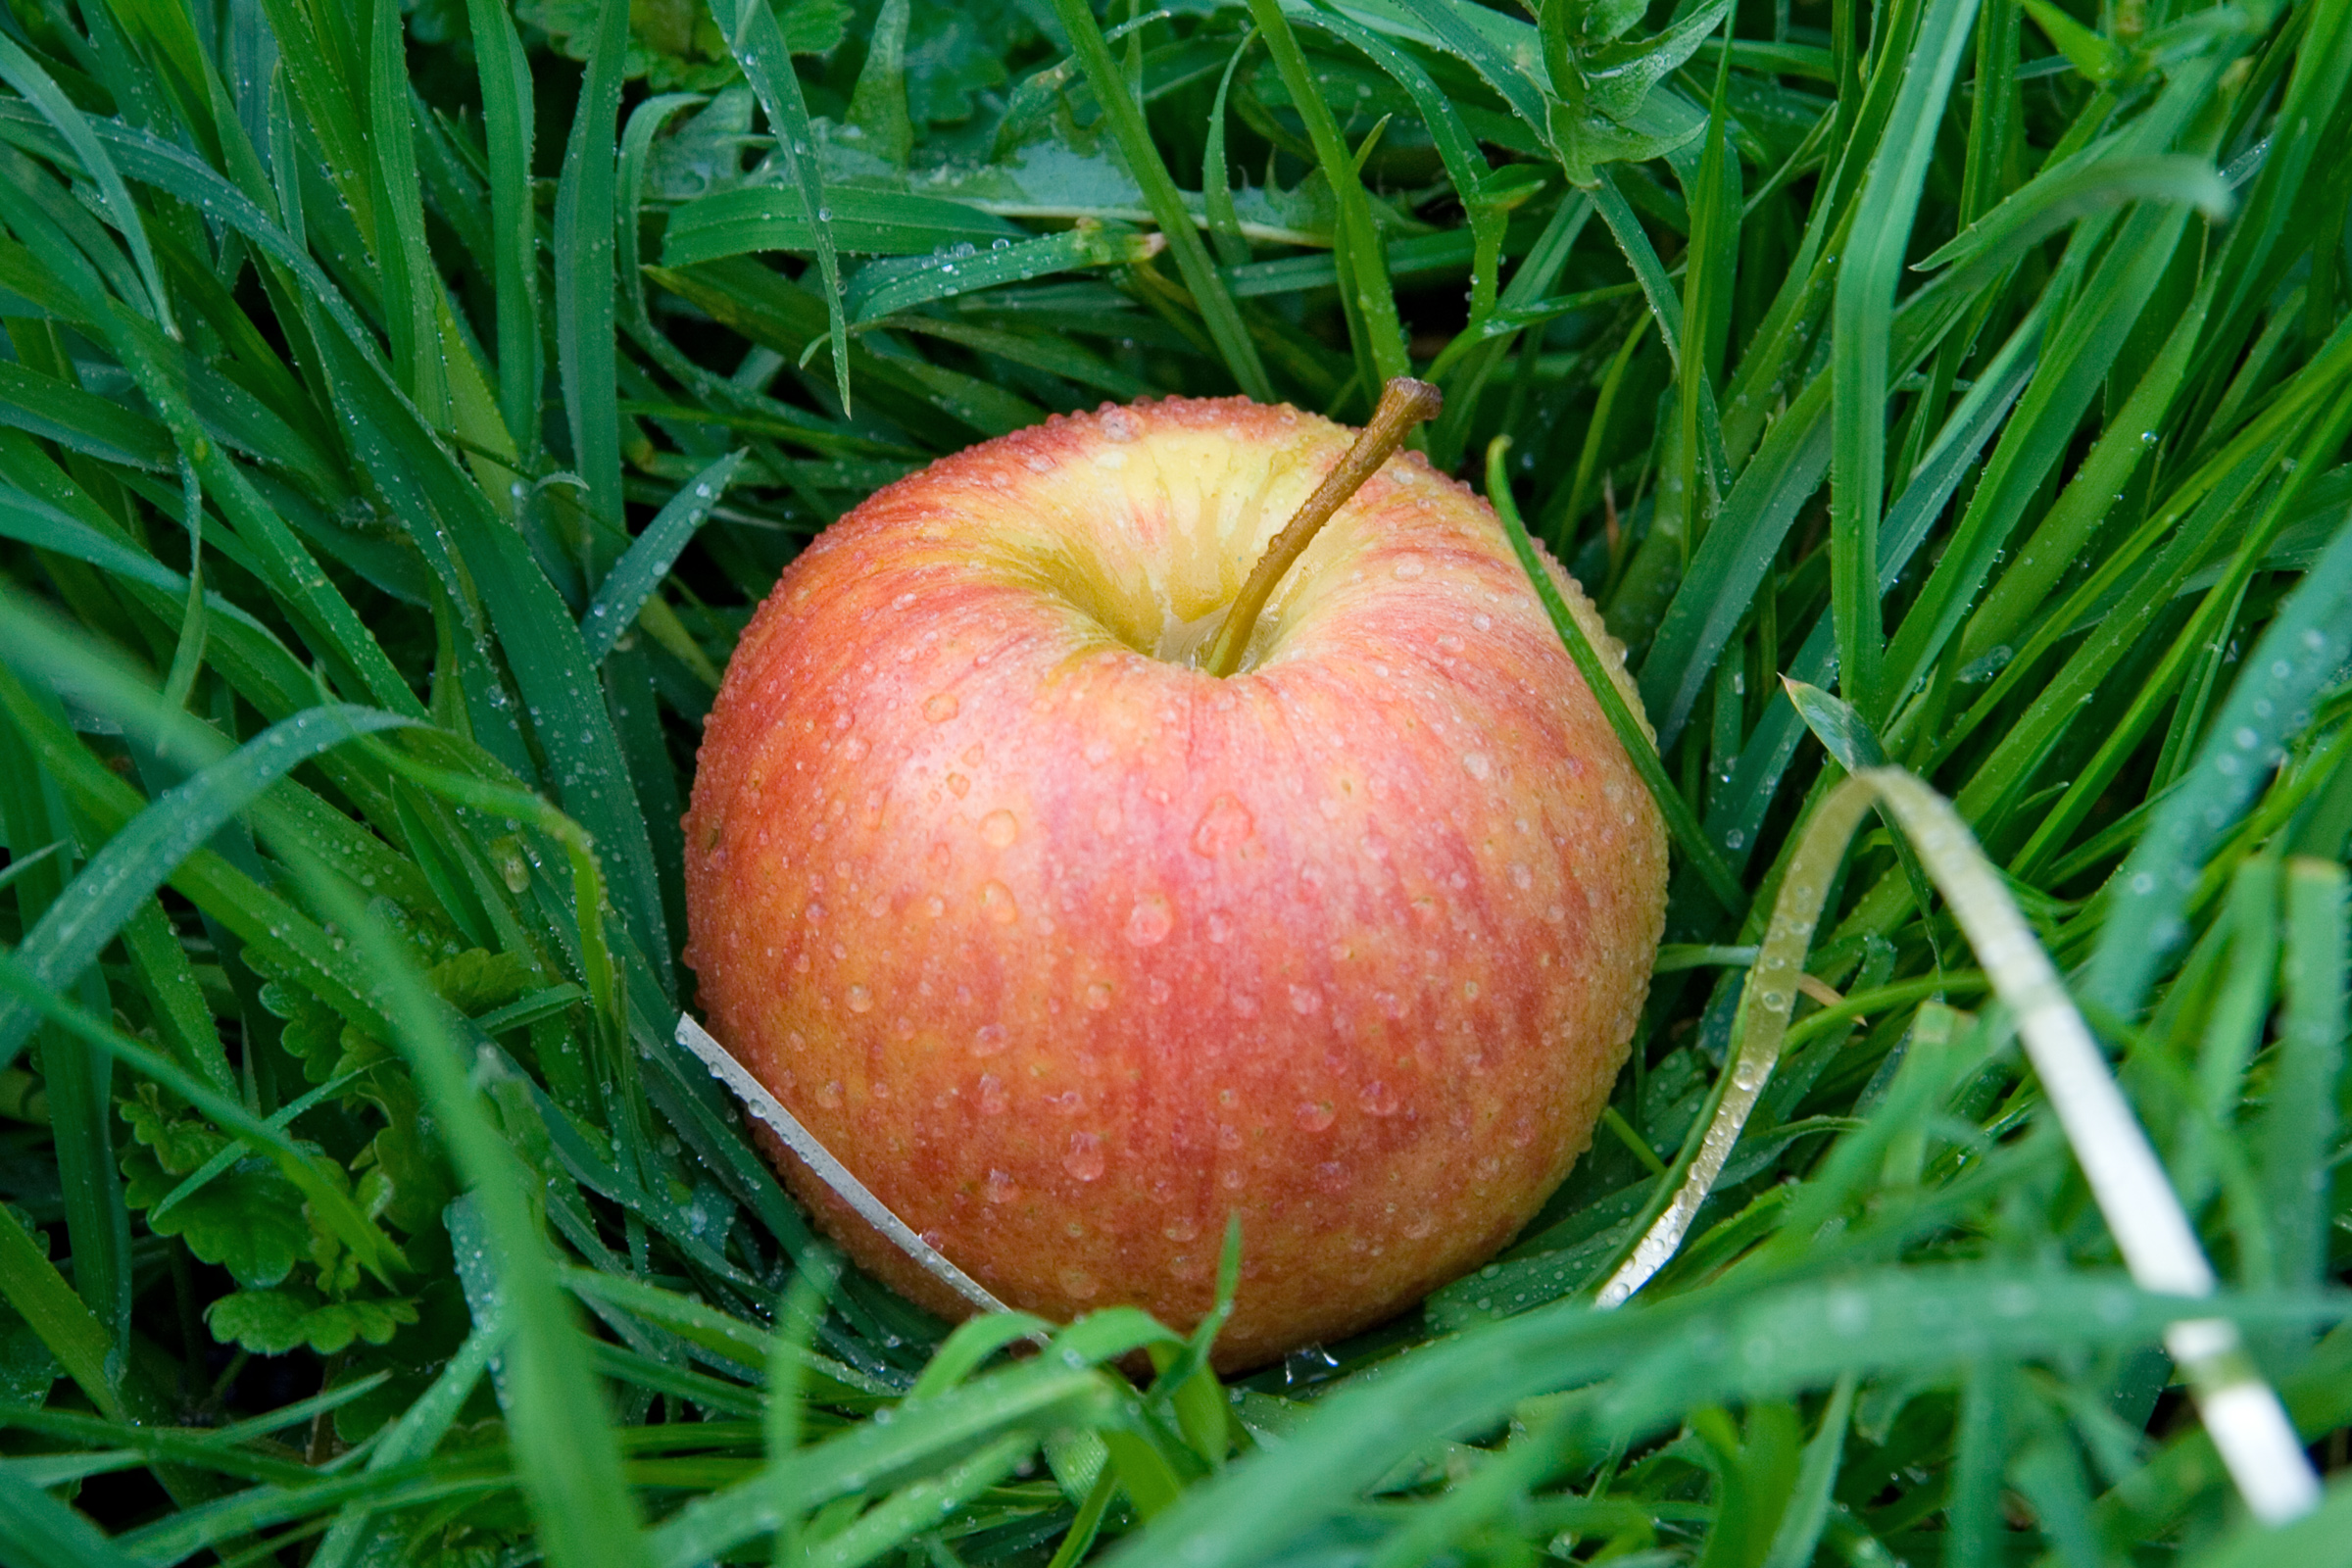 Apple fruit in the grass